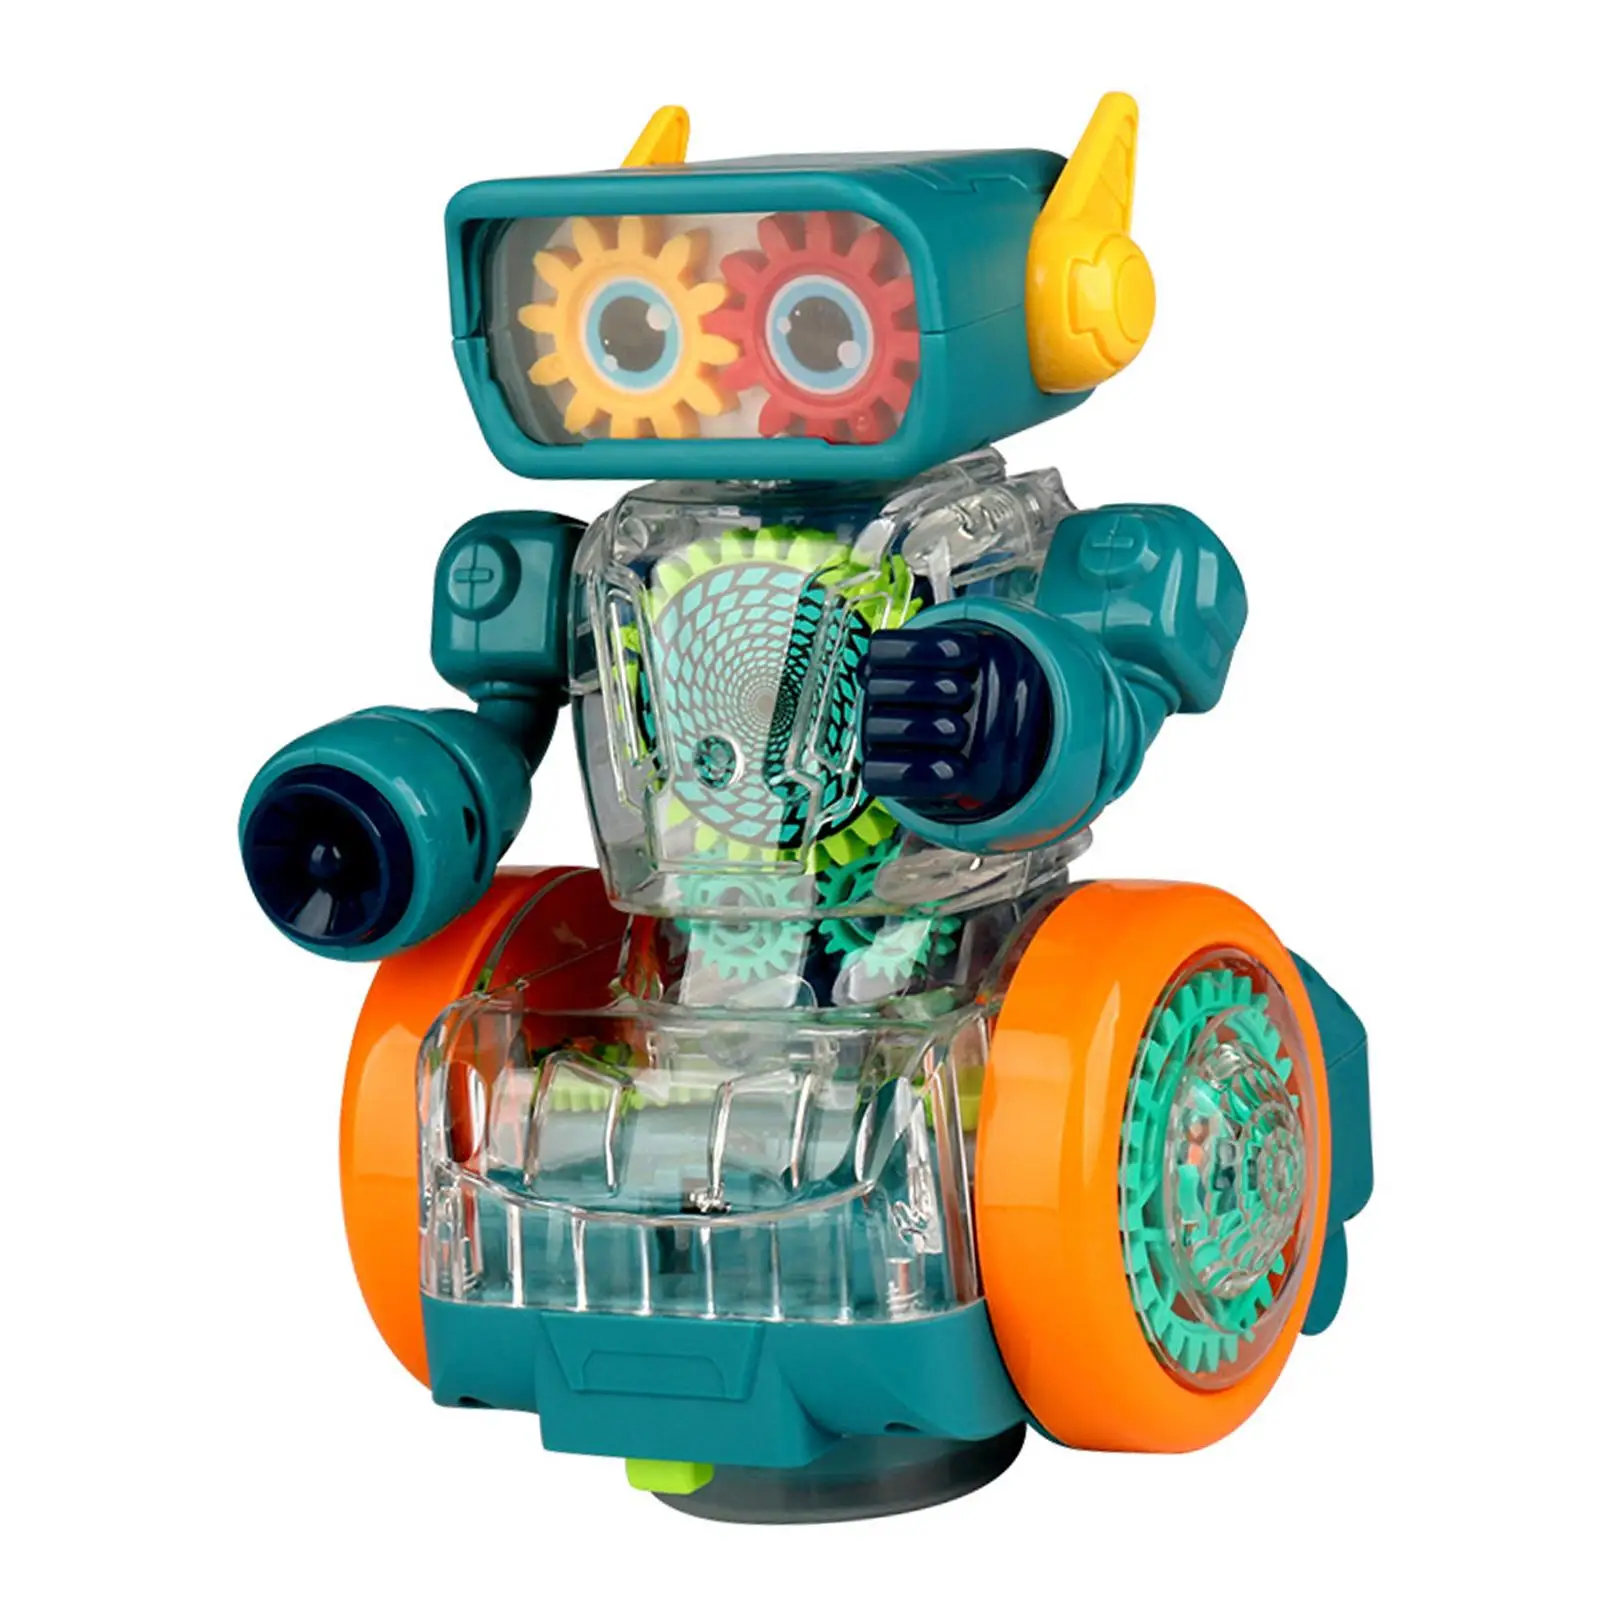 Mechanical Gear Robot Toy Developmental Toys with Lights for Birthday Gifts